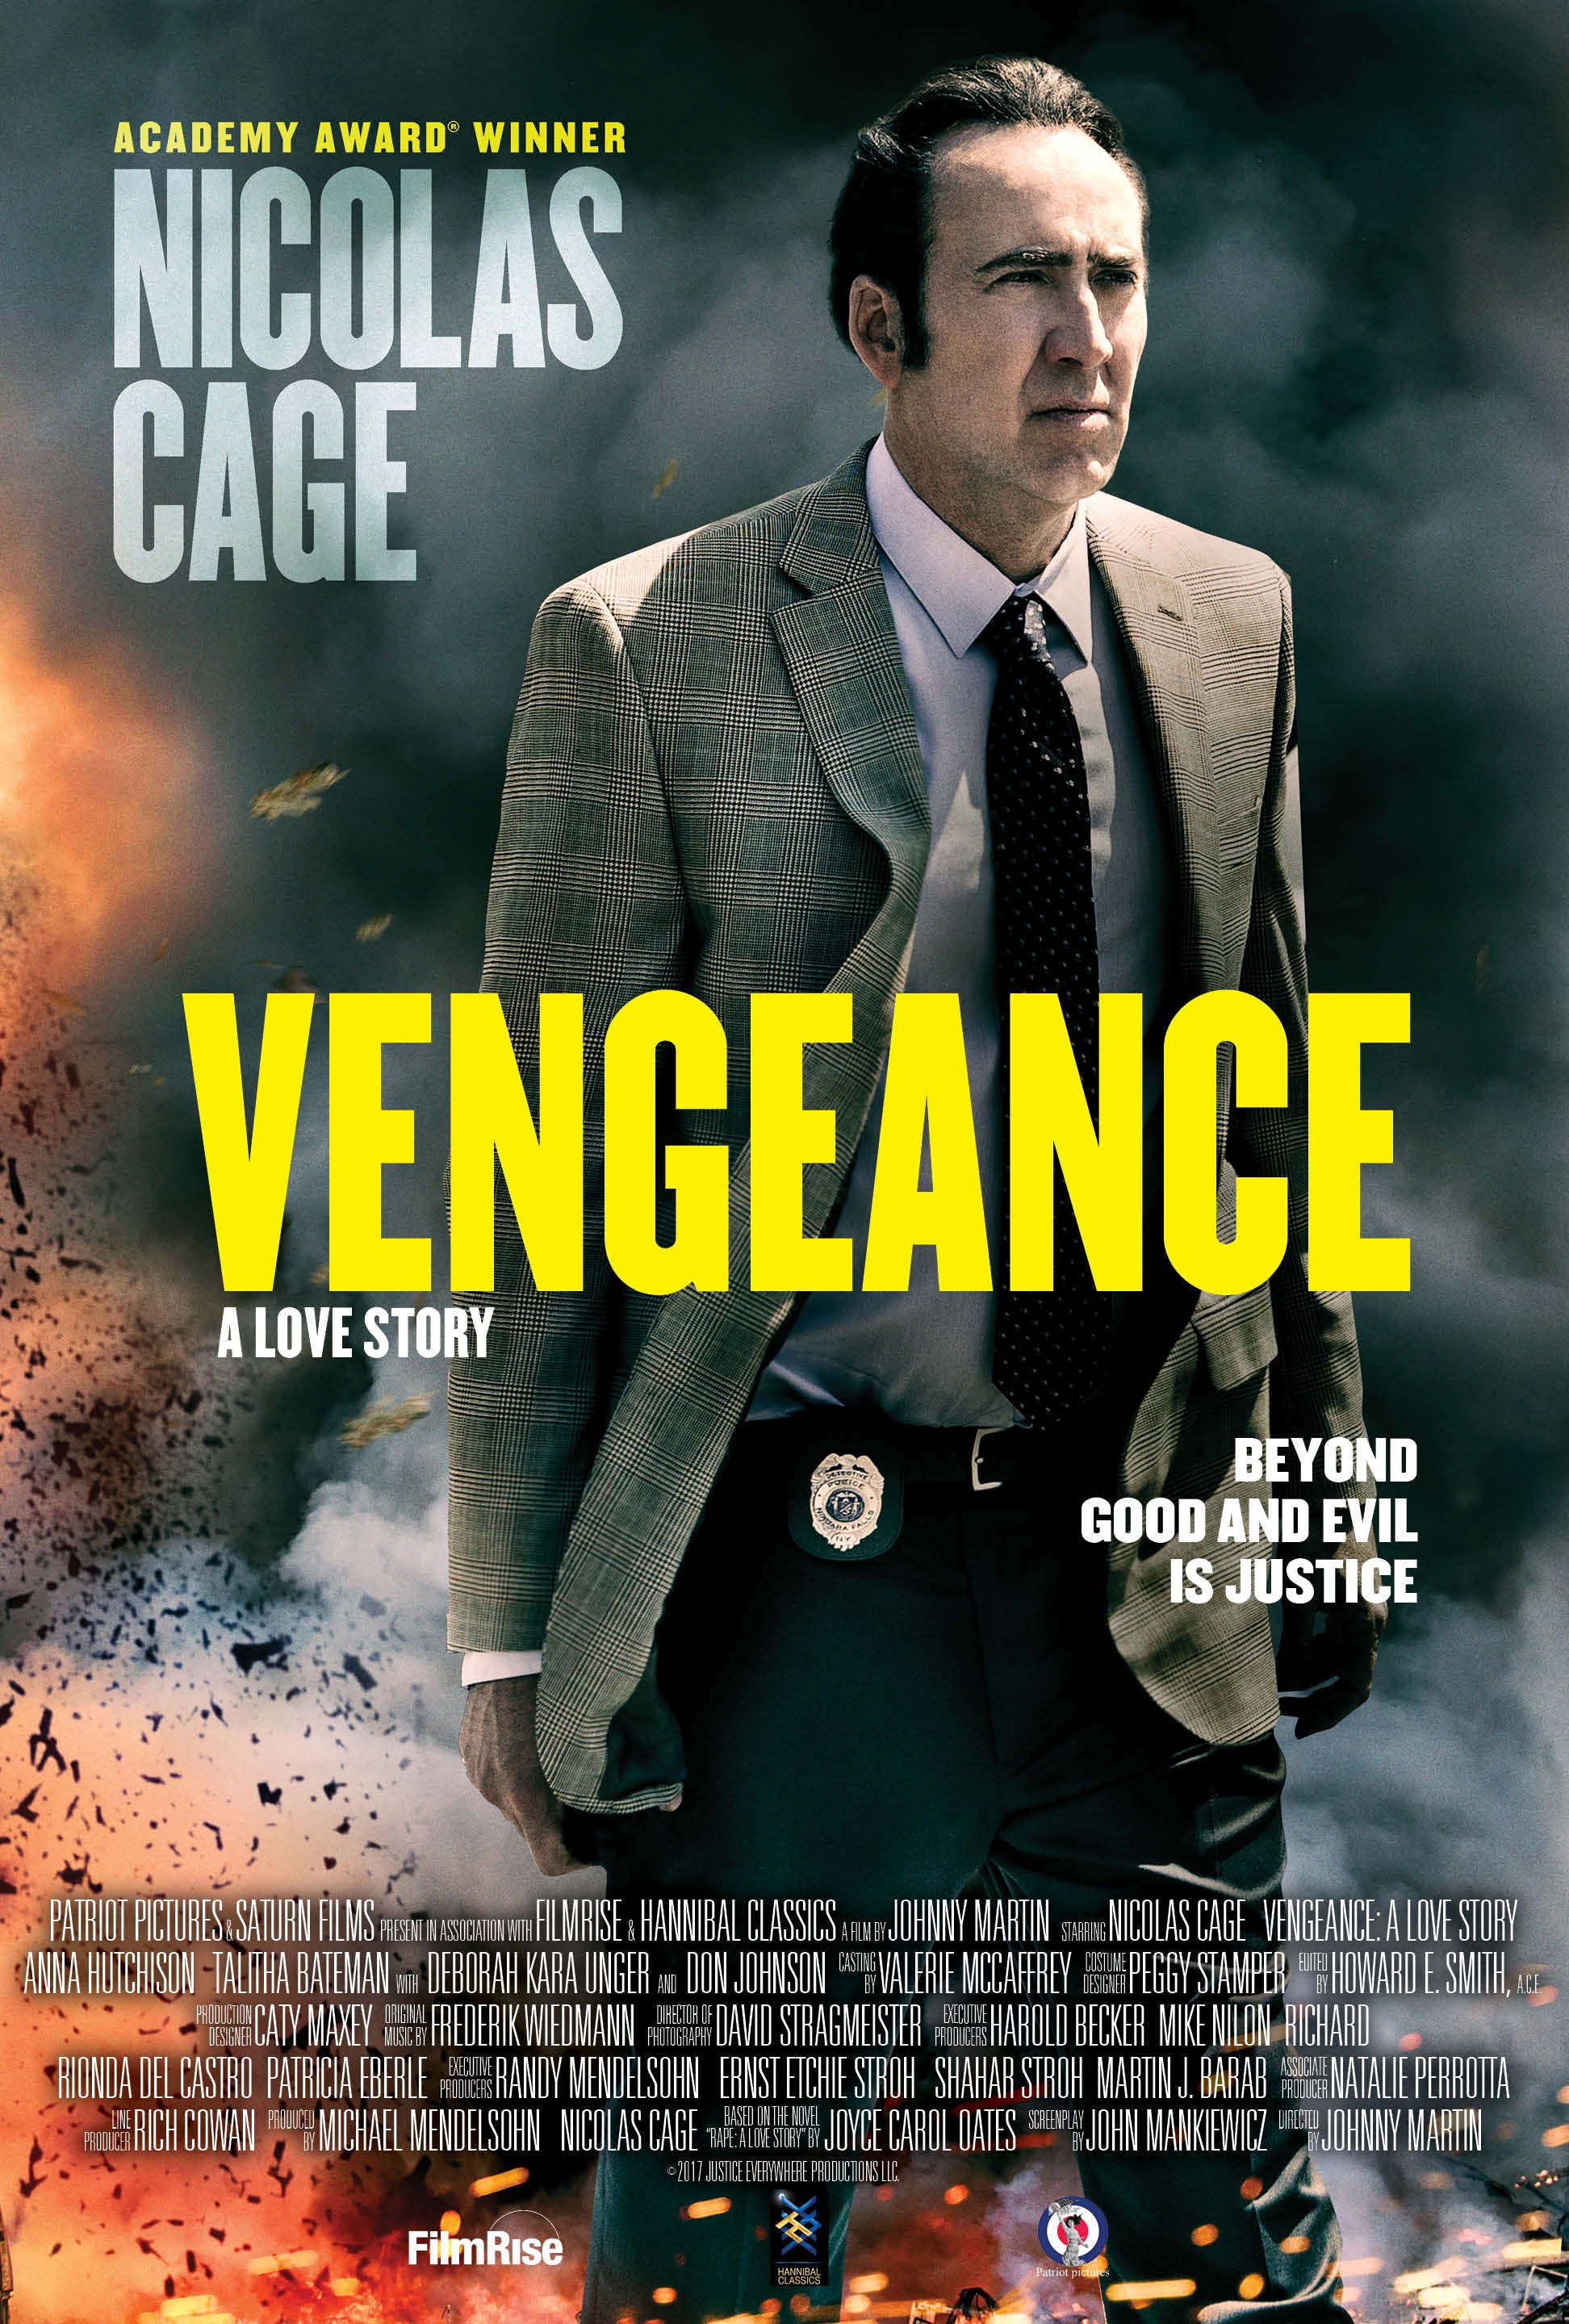 Vengeance: A Love Story image © Patriot Pictures